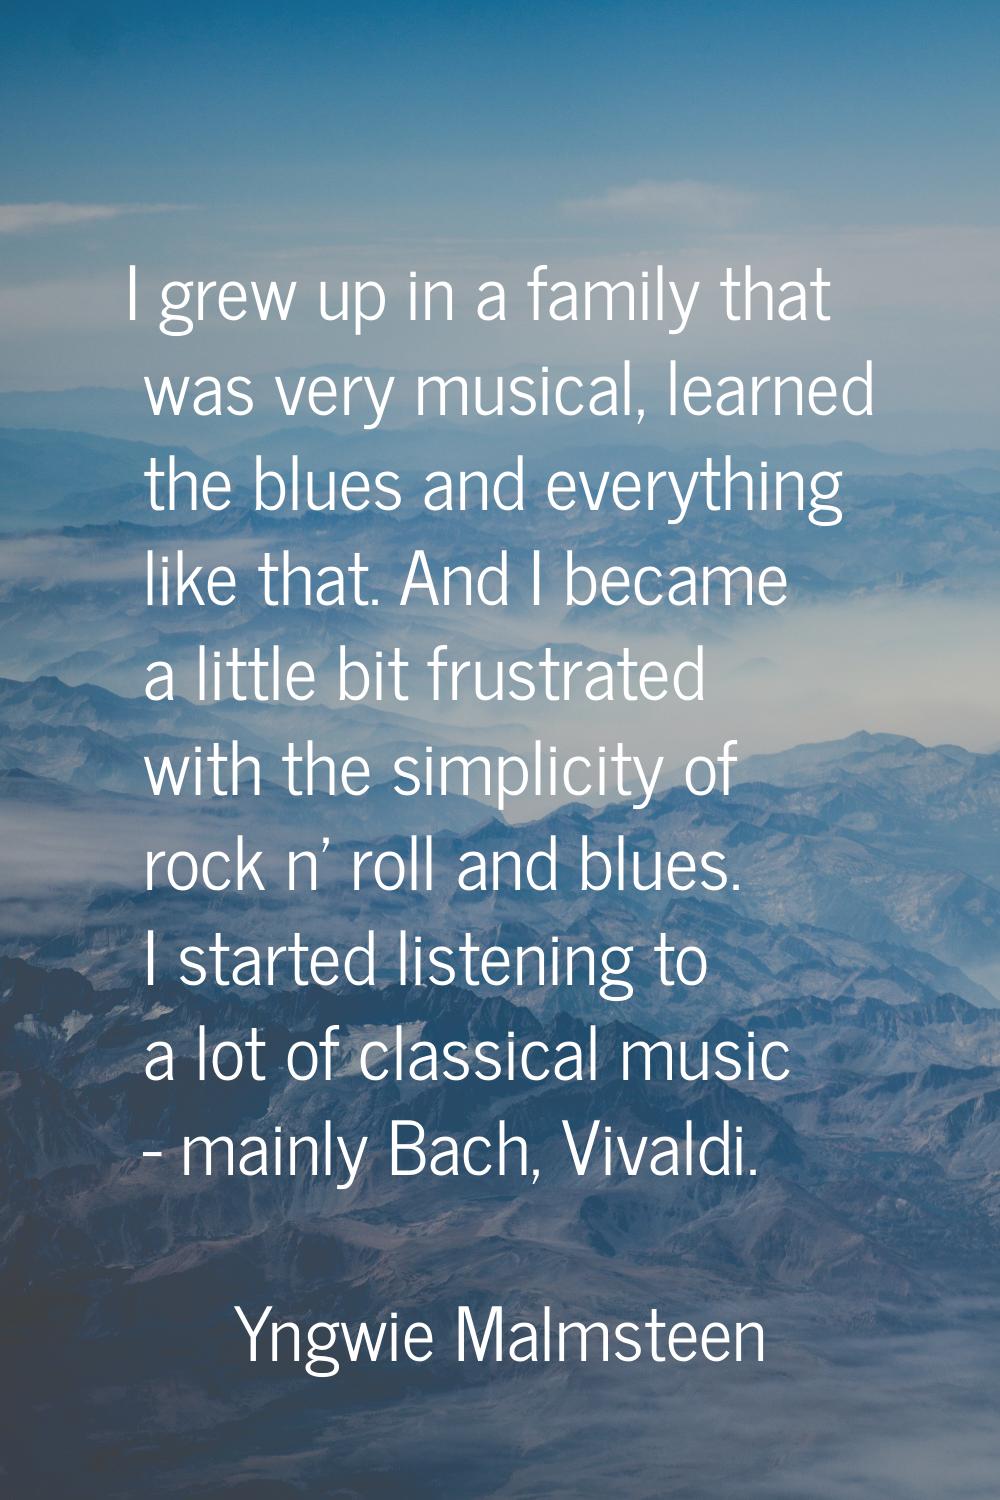 I grew up in a family that was very musical, learned the blues and everything like that. And I beca